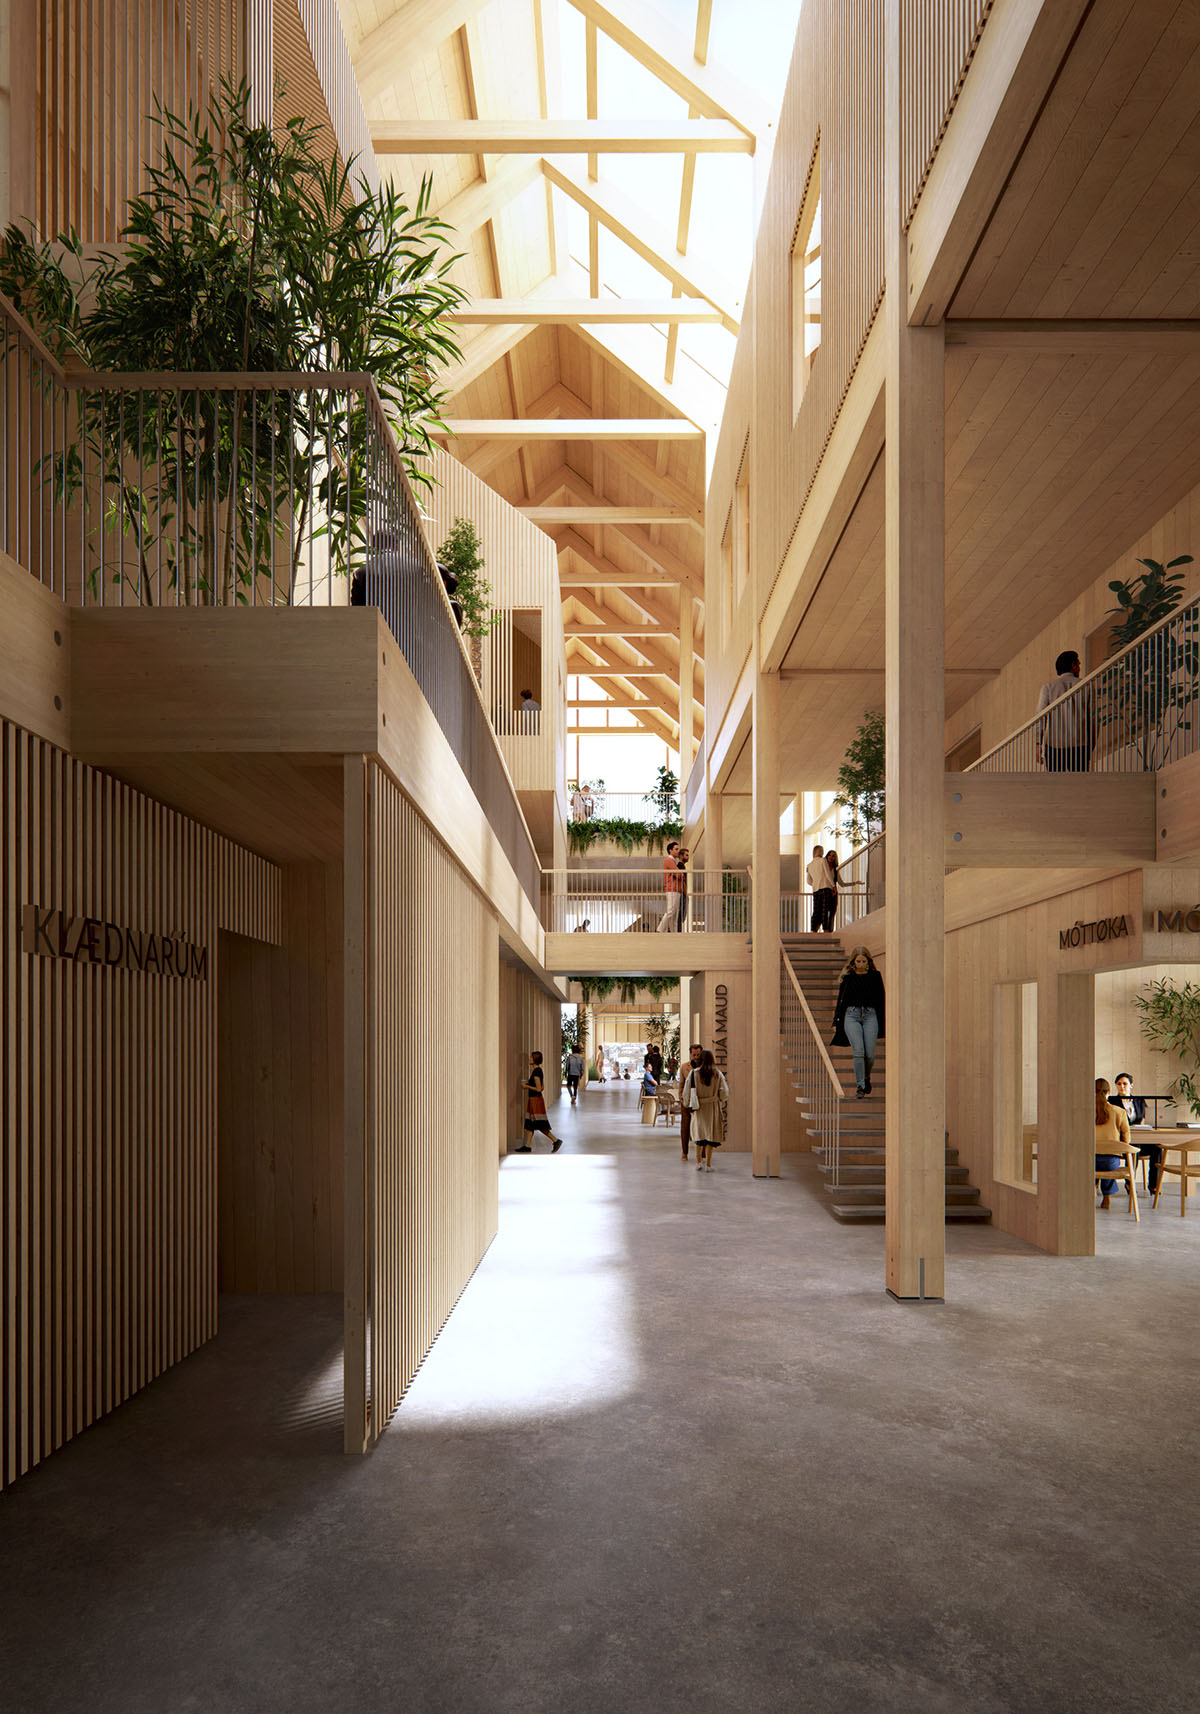 Henning Larsen designs new mass timber and microclimate university building in Faroe Islands 